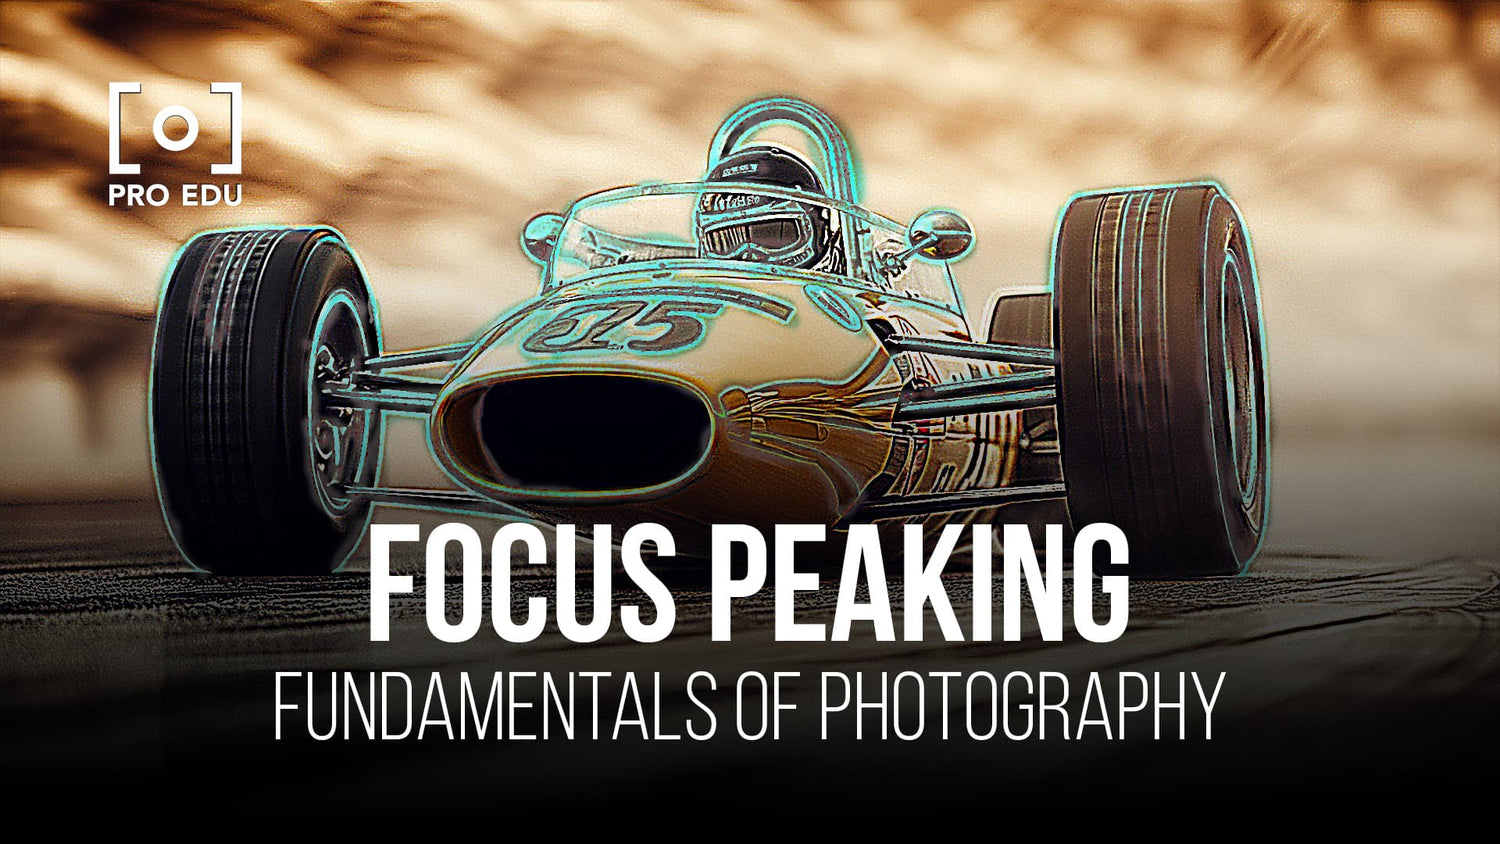 Achieving sharp and focused images with focus peaking, a revolutionary photography tool